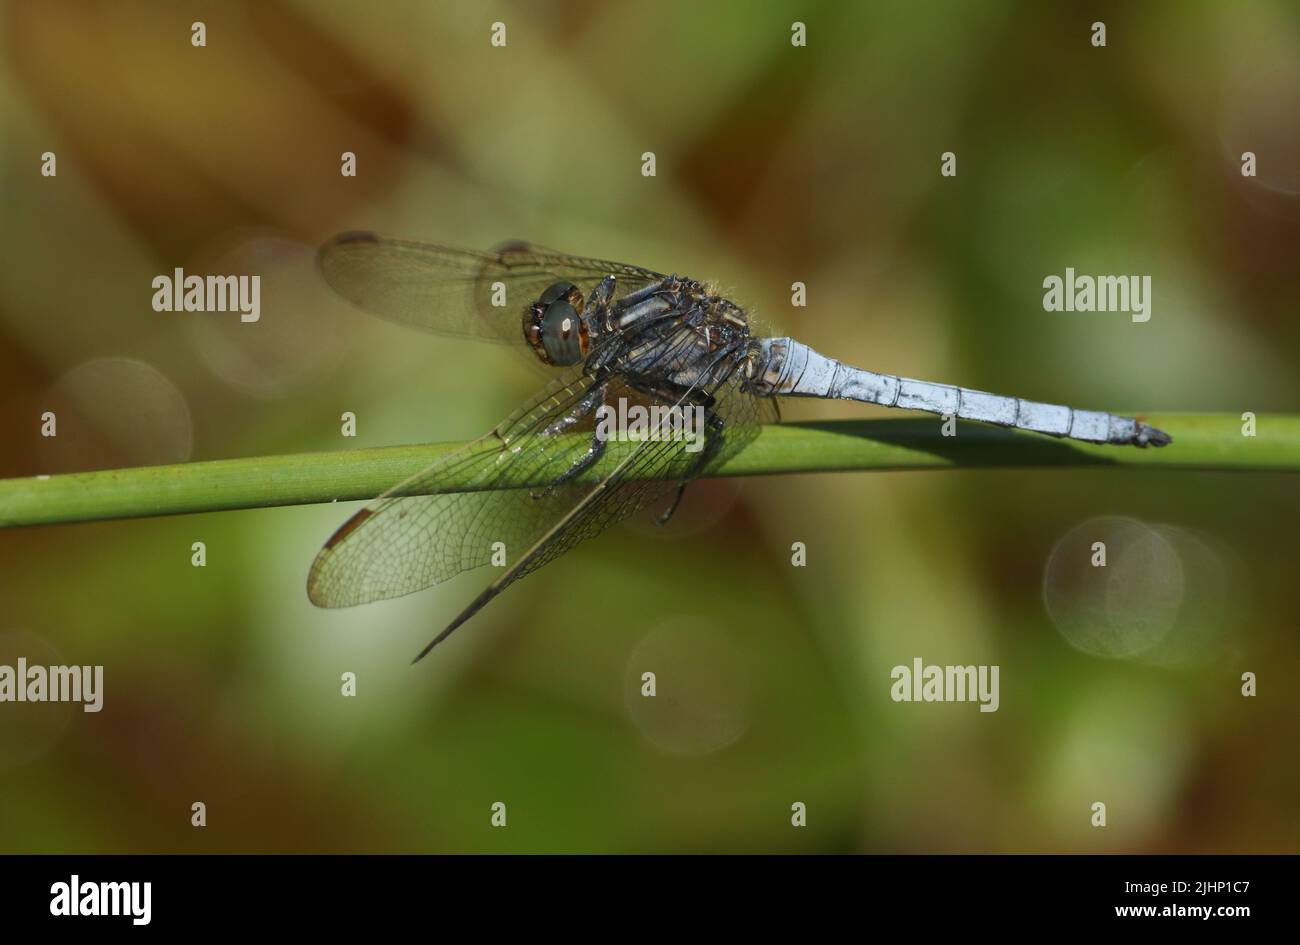 A Keeled Skimmer Dragonfly, Orthetrum coerulescens, perched on a Reed at the edge of a bog. Stock Photo